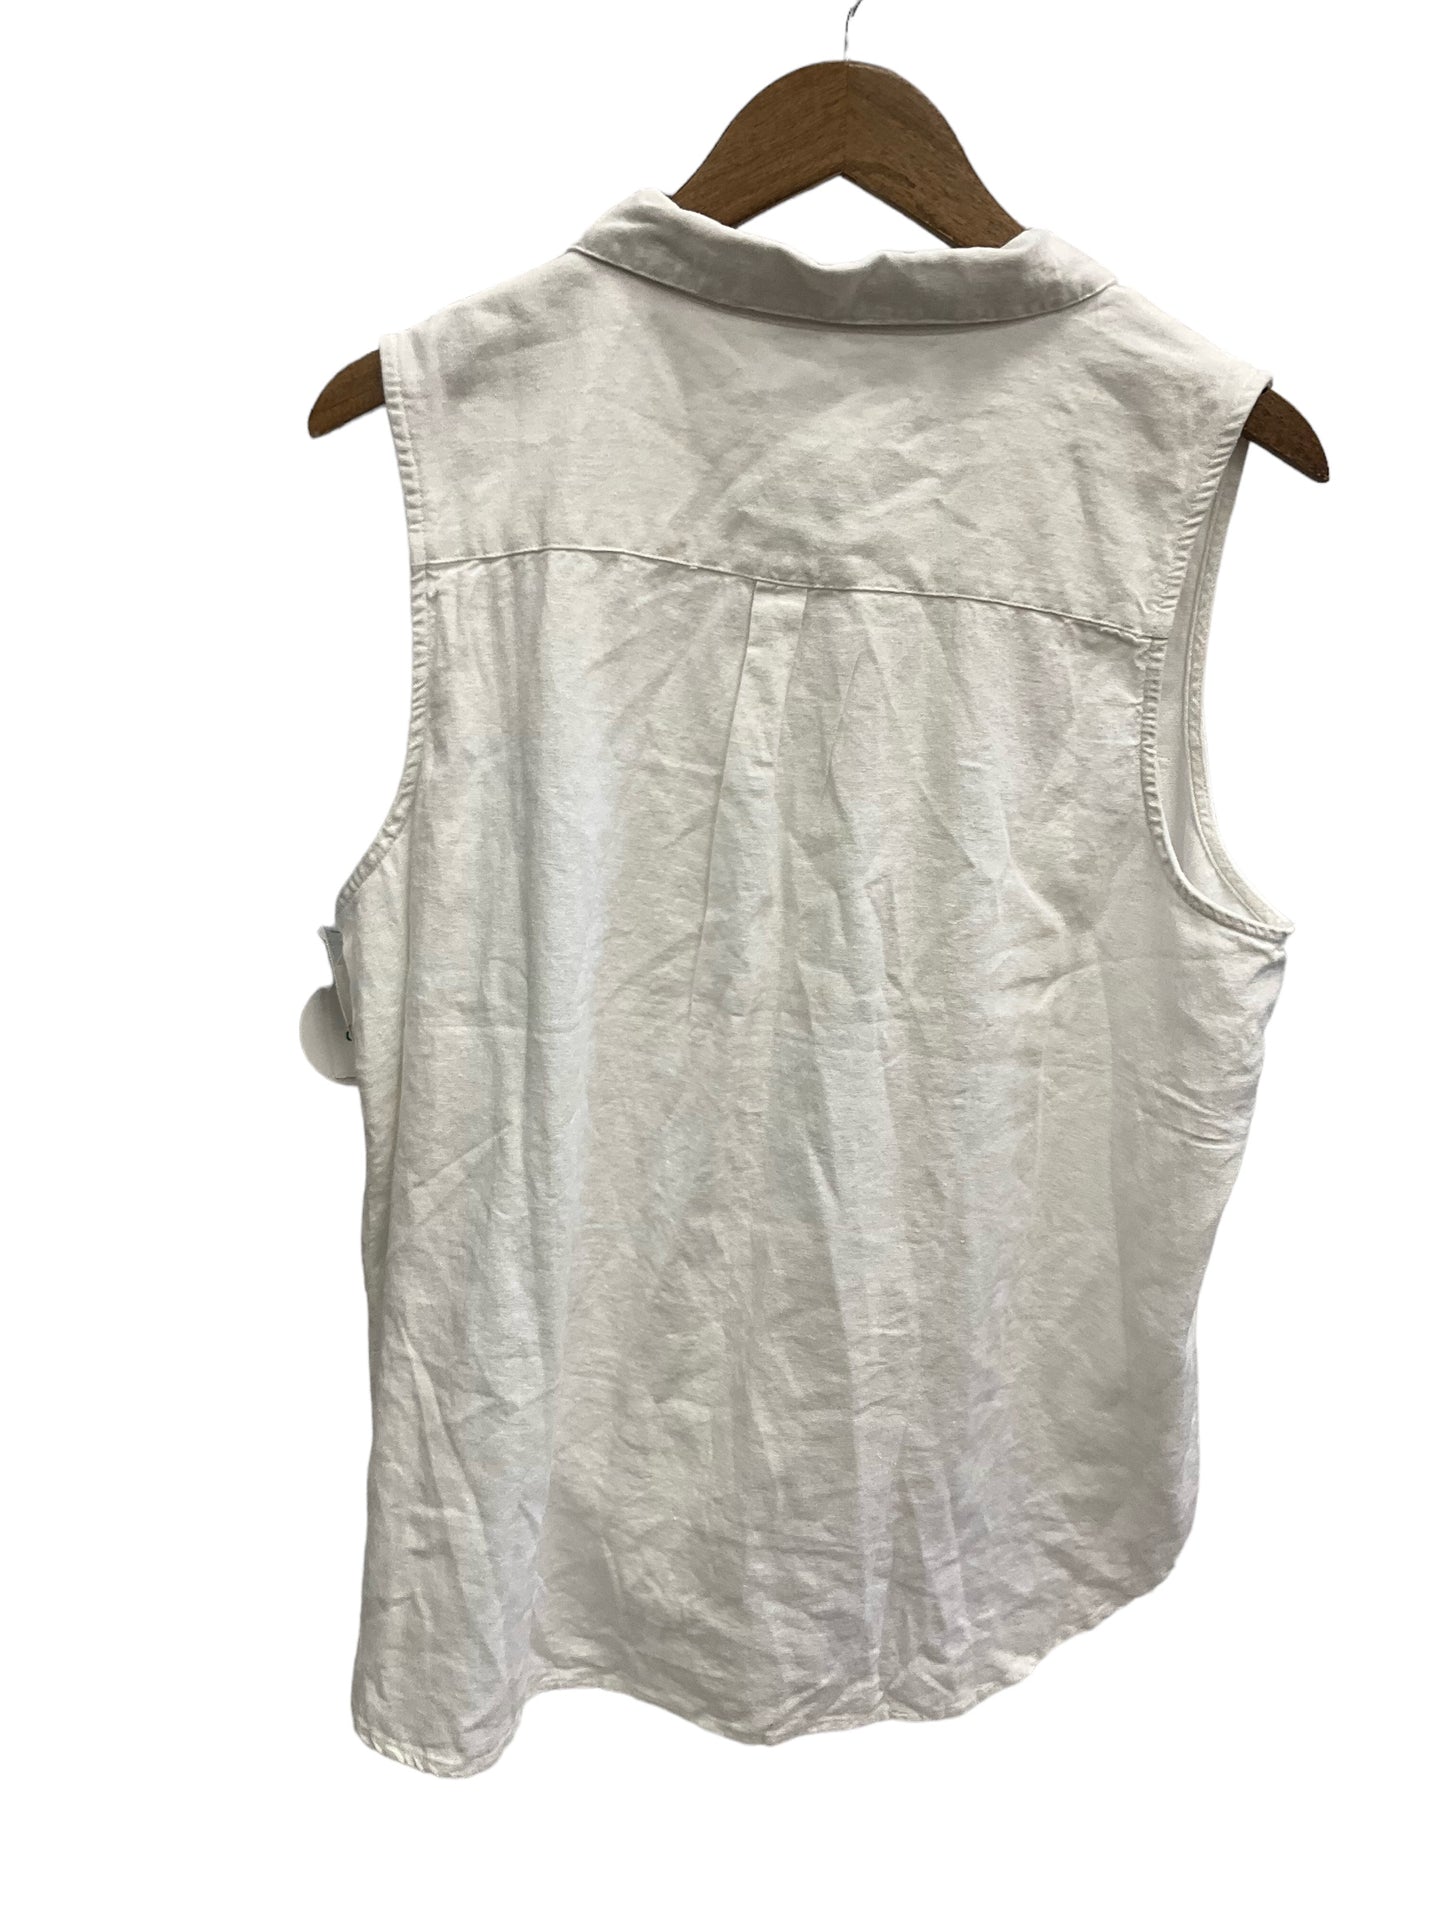 Top Sleeveless By Dip  Size: Xl